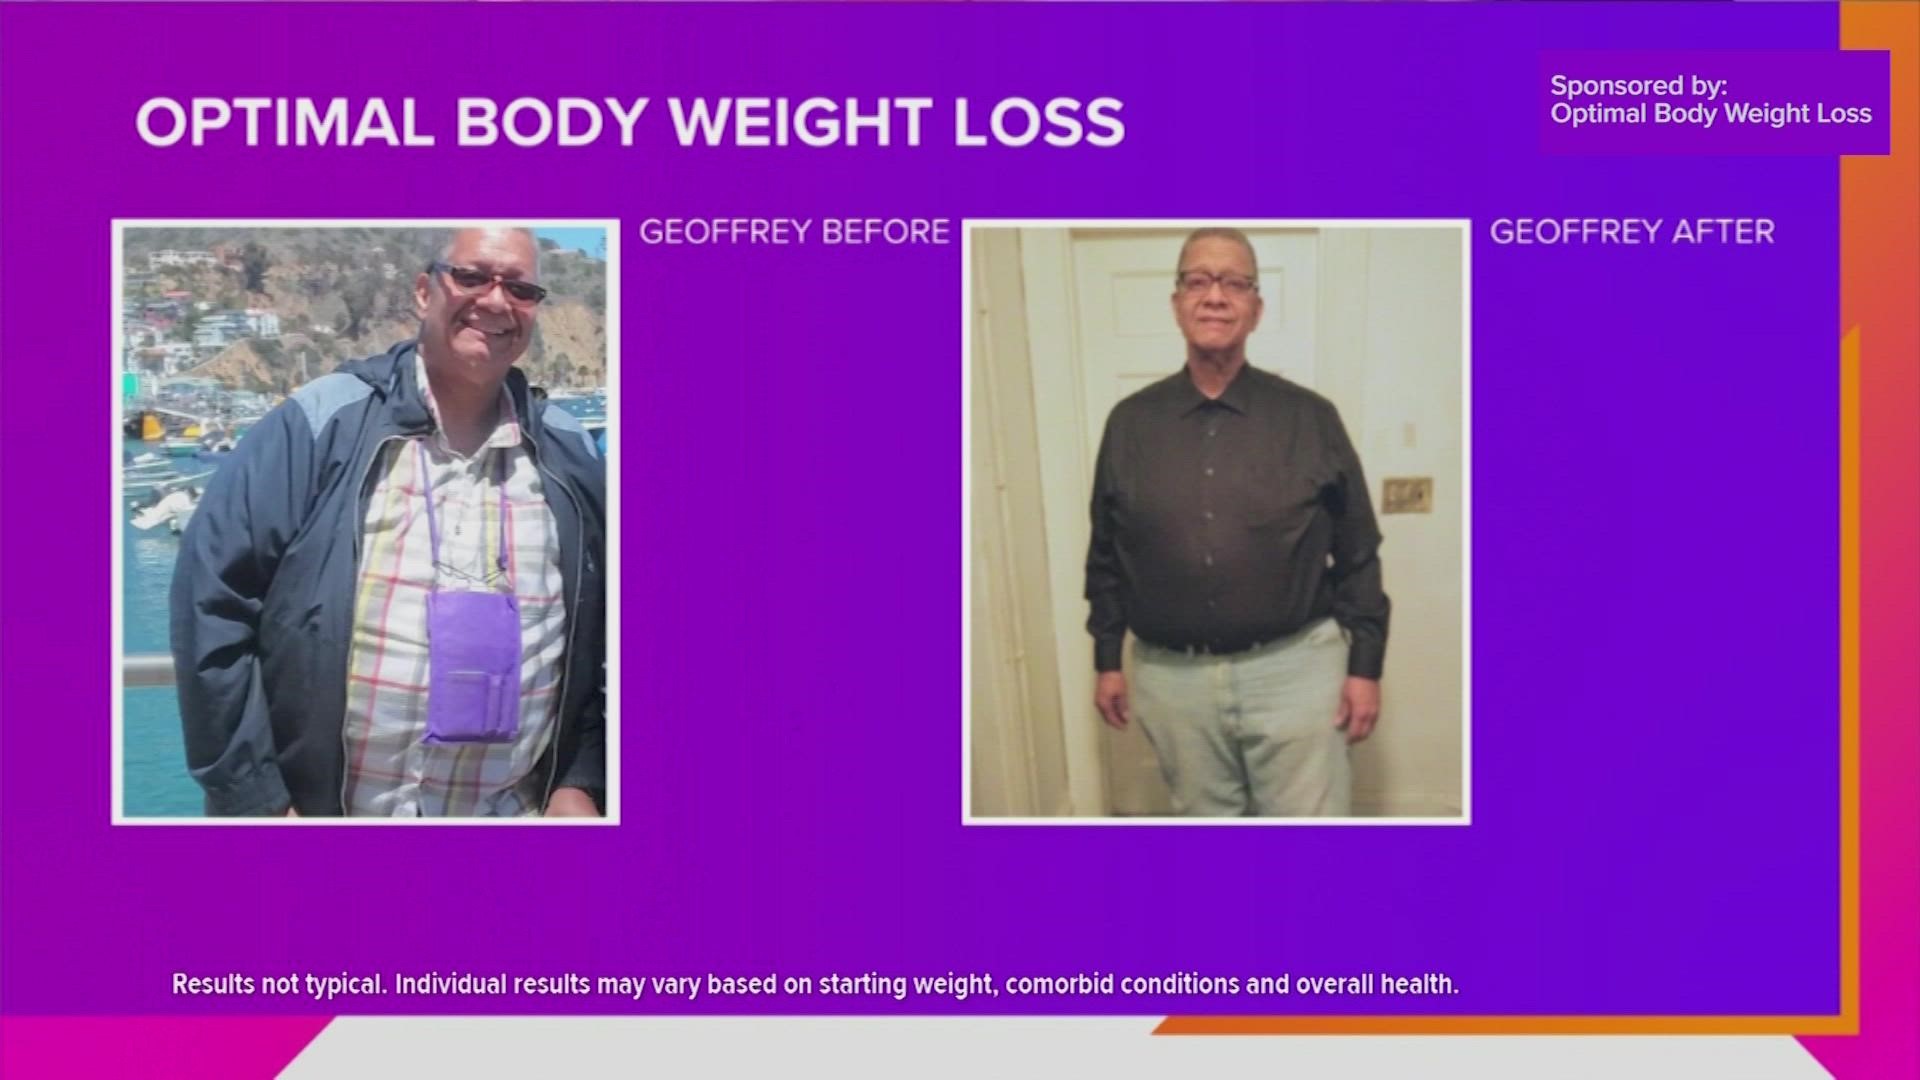 Dr. Cory Aplin shares how he can help you lose weight without losing your sanity